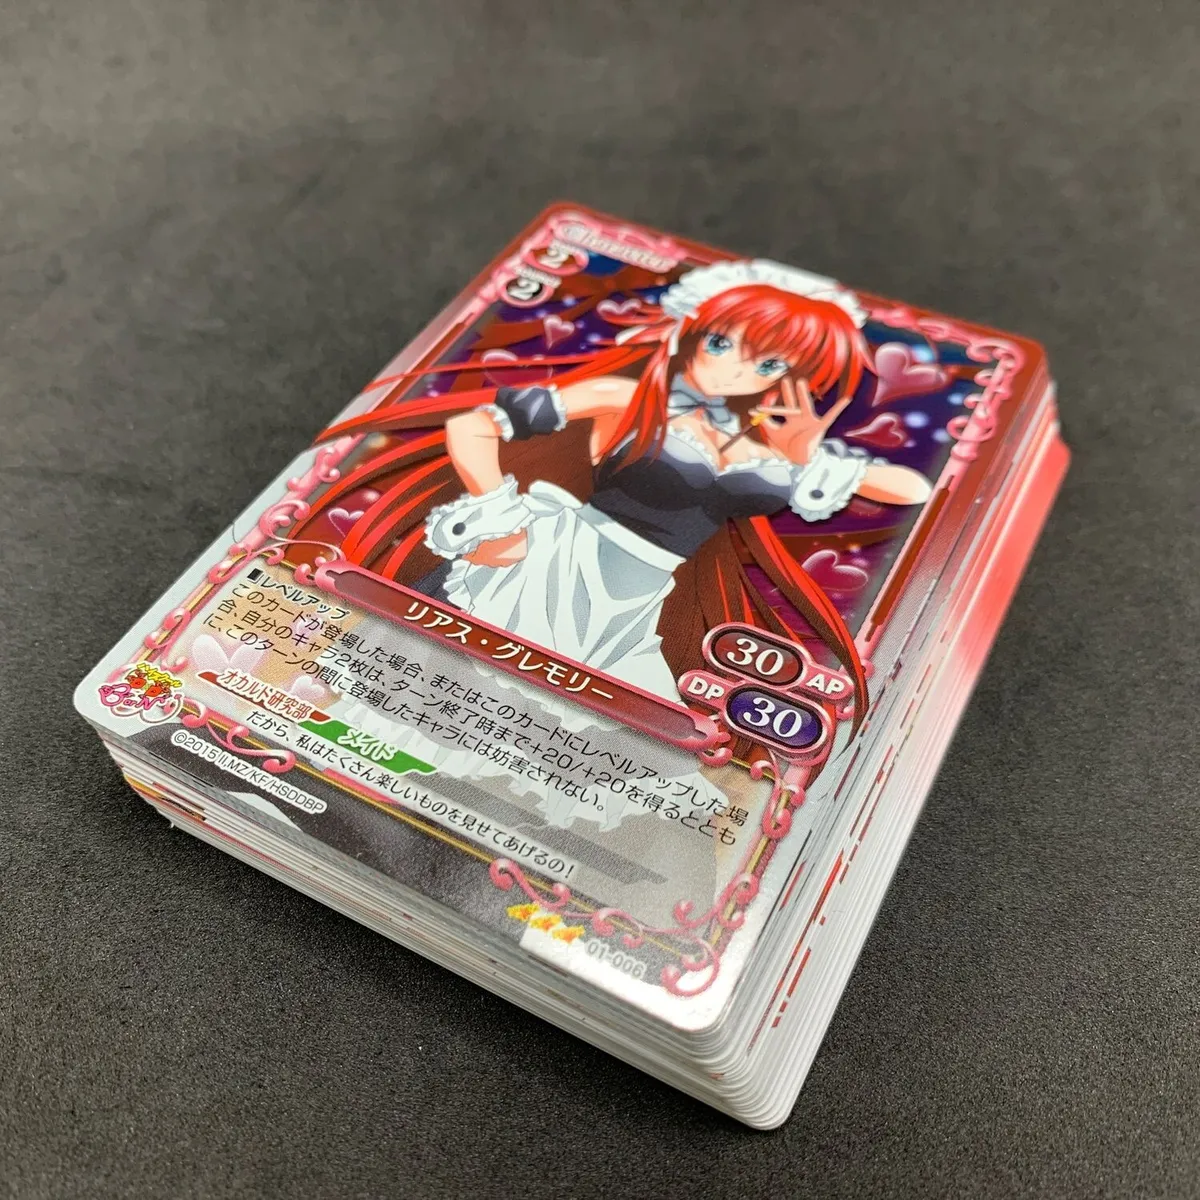 dxd card game